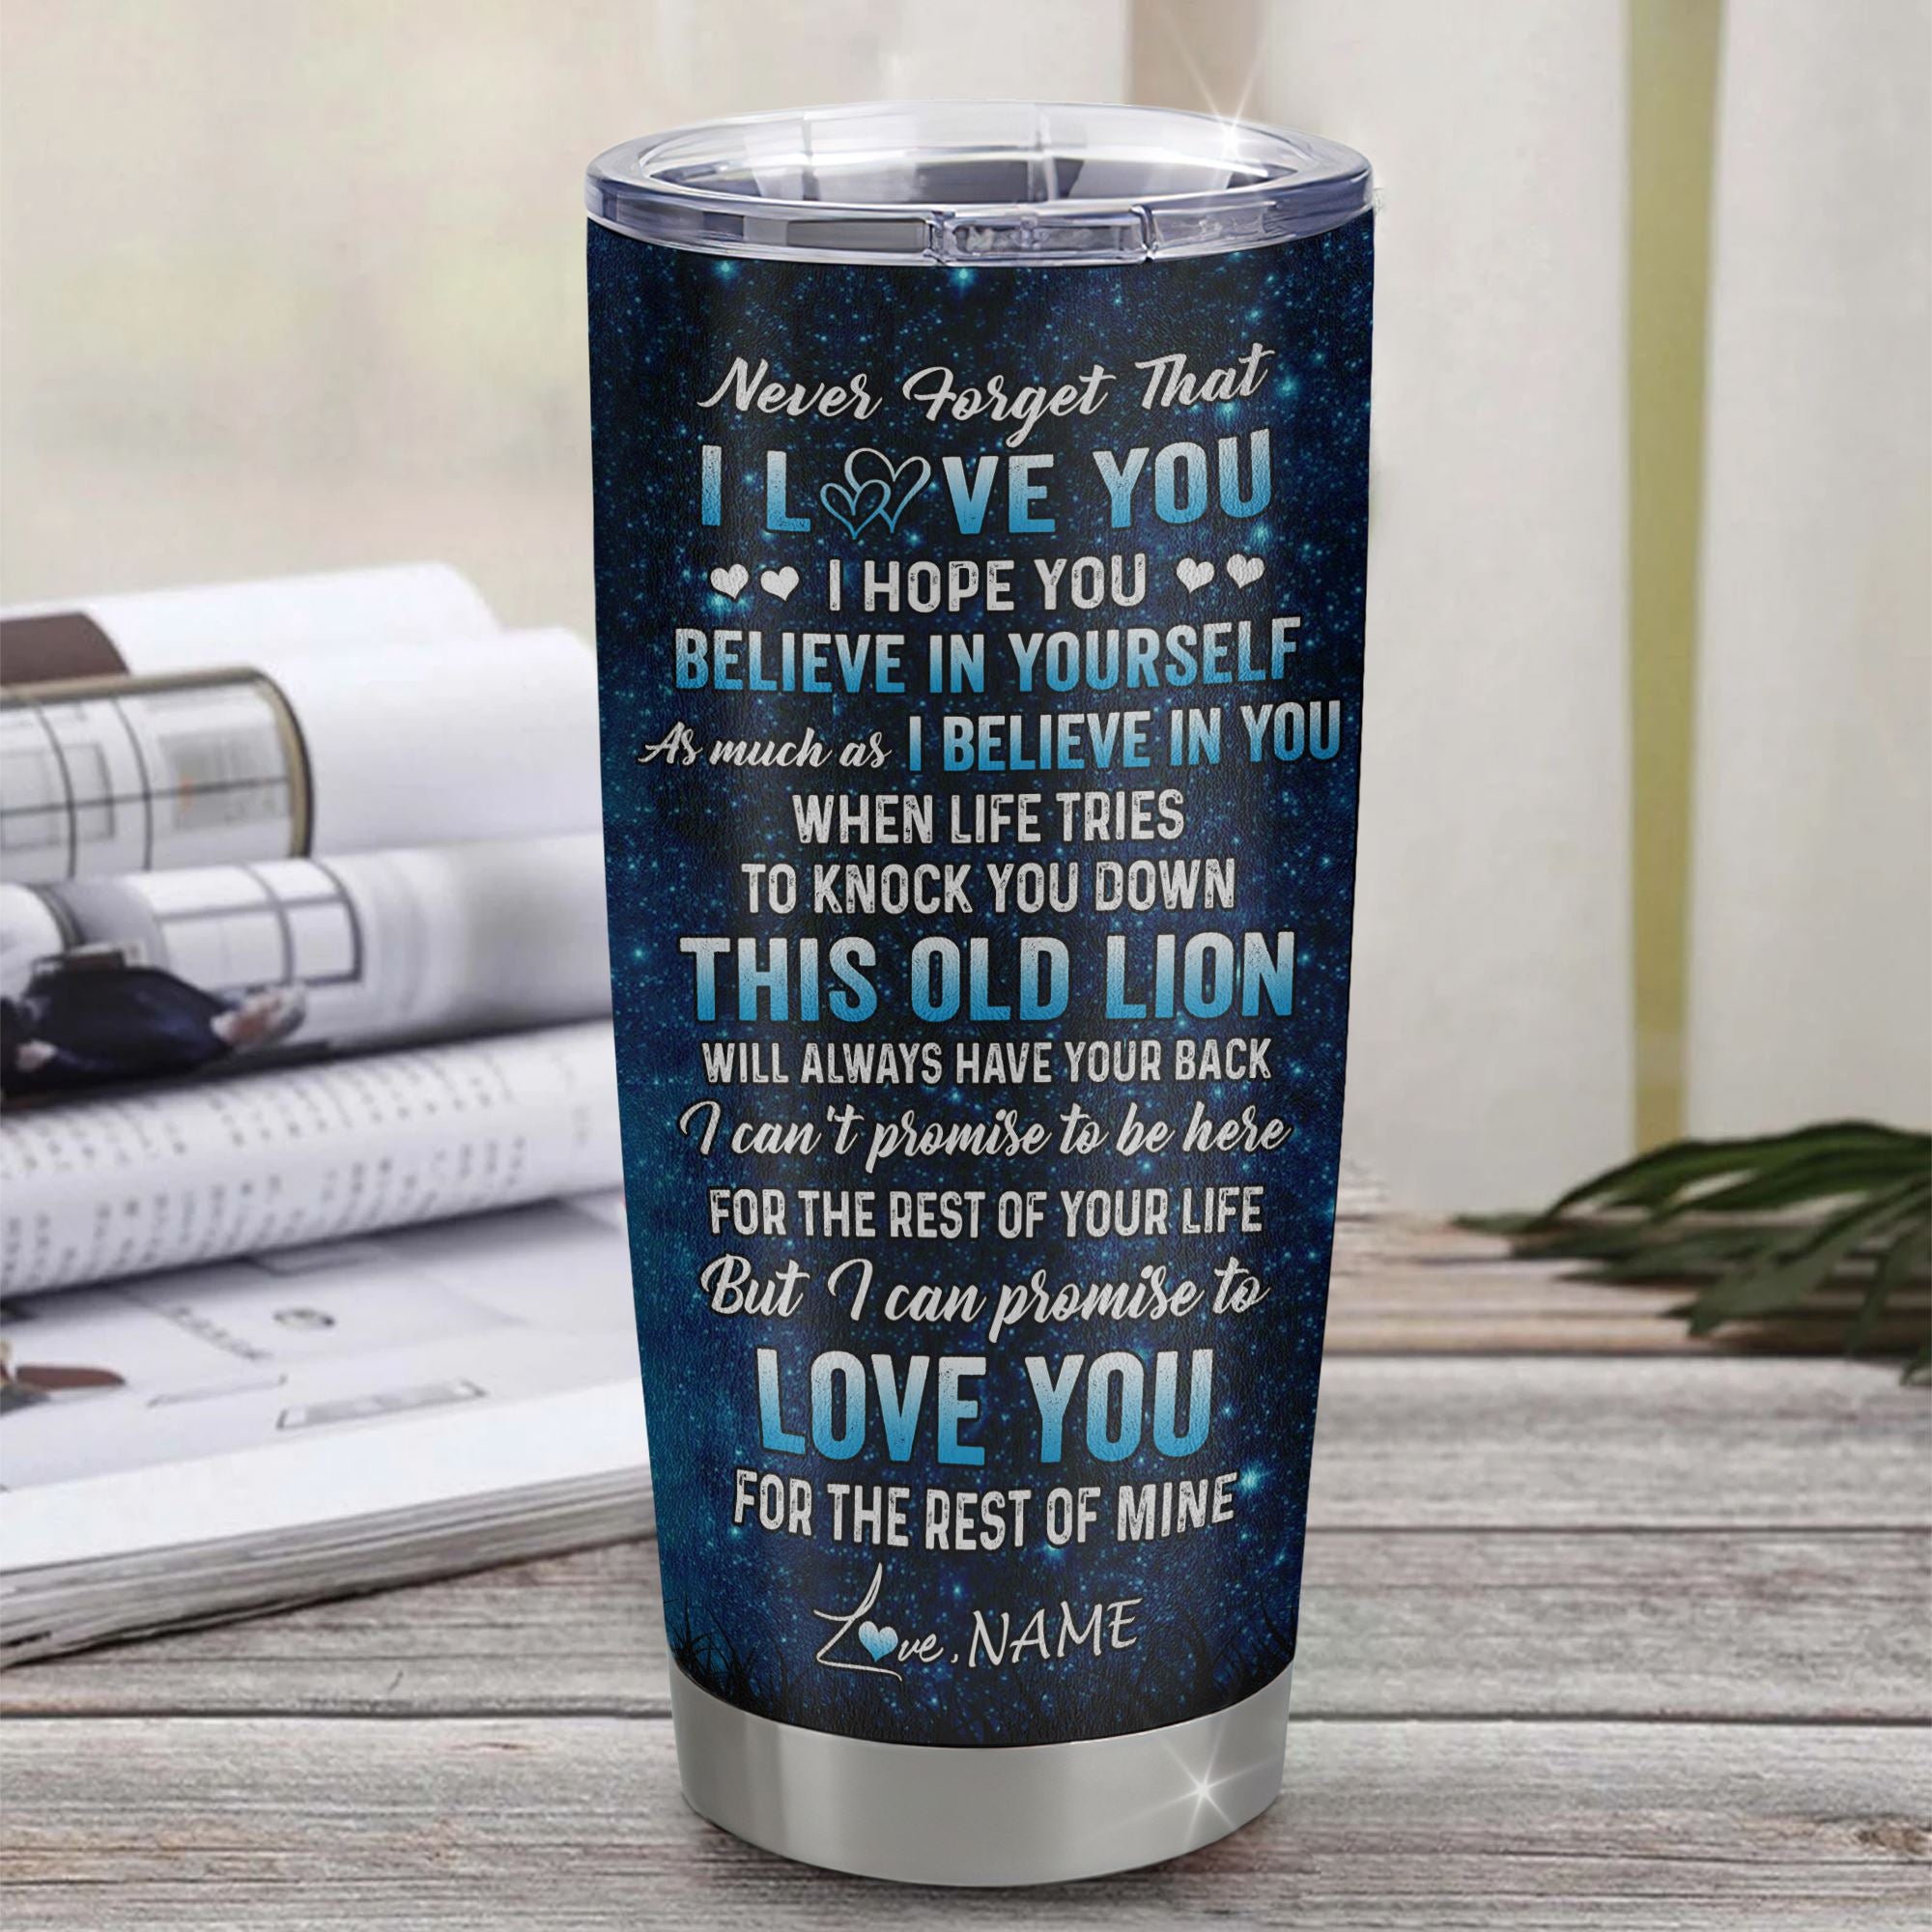 Personalized_To_My_Granddaughter_Tumbler_From_Grandpa_Stainless_Steel_Cup_This_Old_Lion_Love_You_Granddaughter_Birthday_Graduation_Christmas_Custom_Travel_Mug_Tumbler_mockup_1.jpg